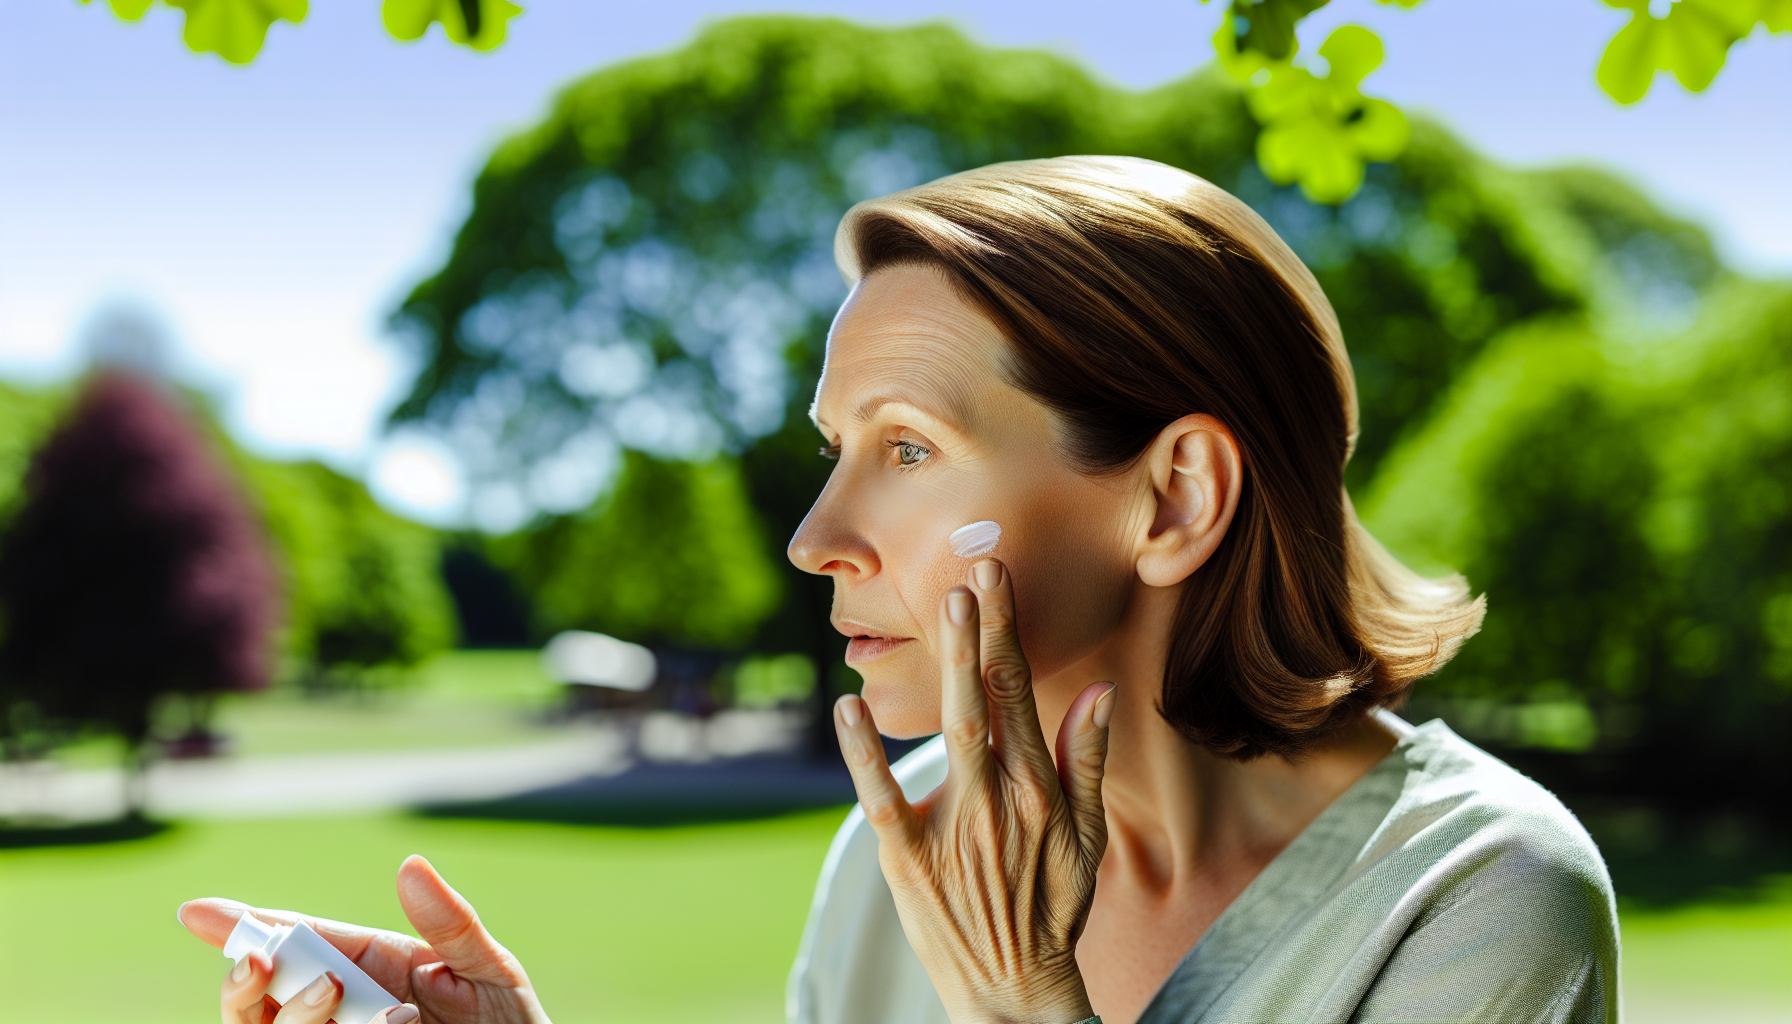 Woman applying sunscreen to protect against dark spots